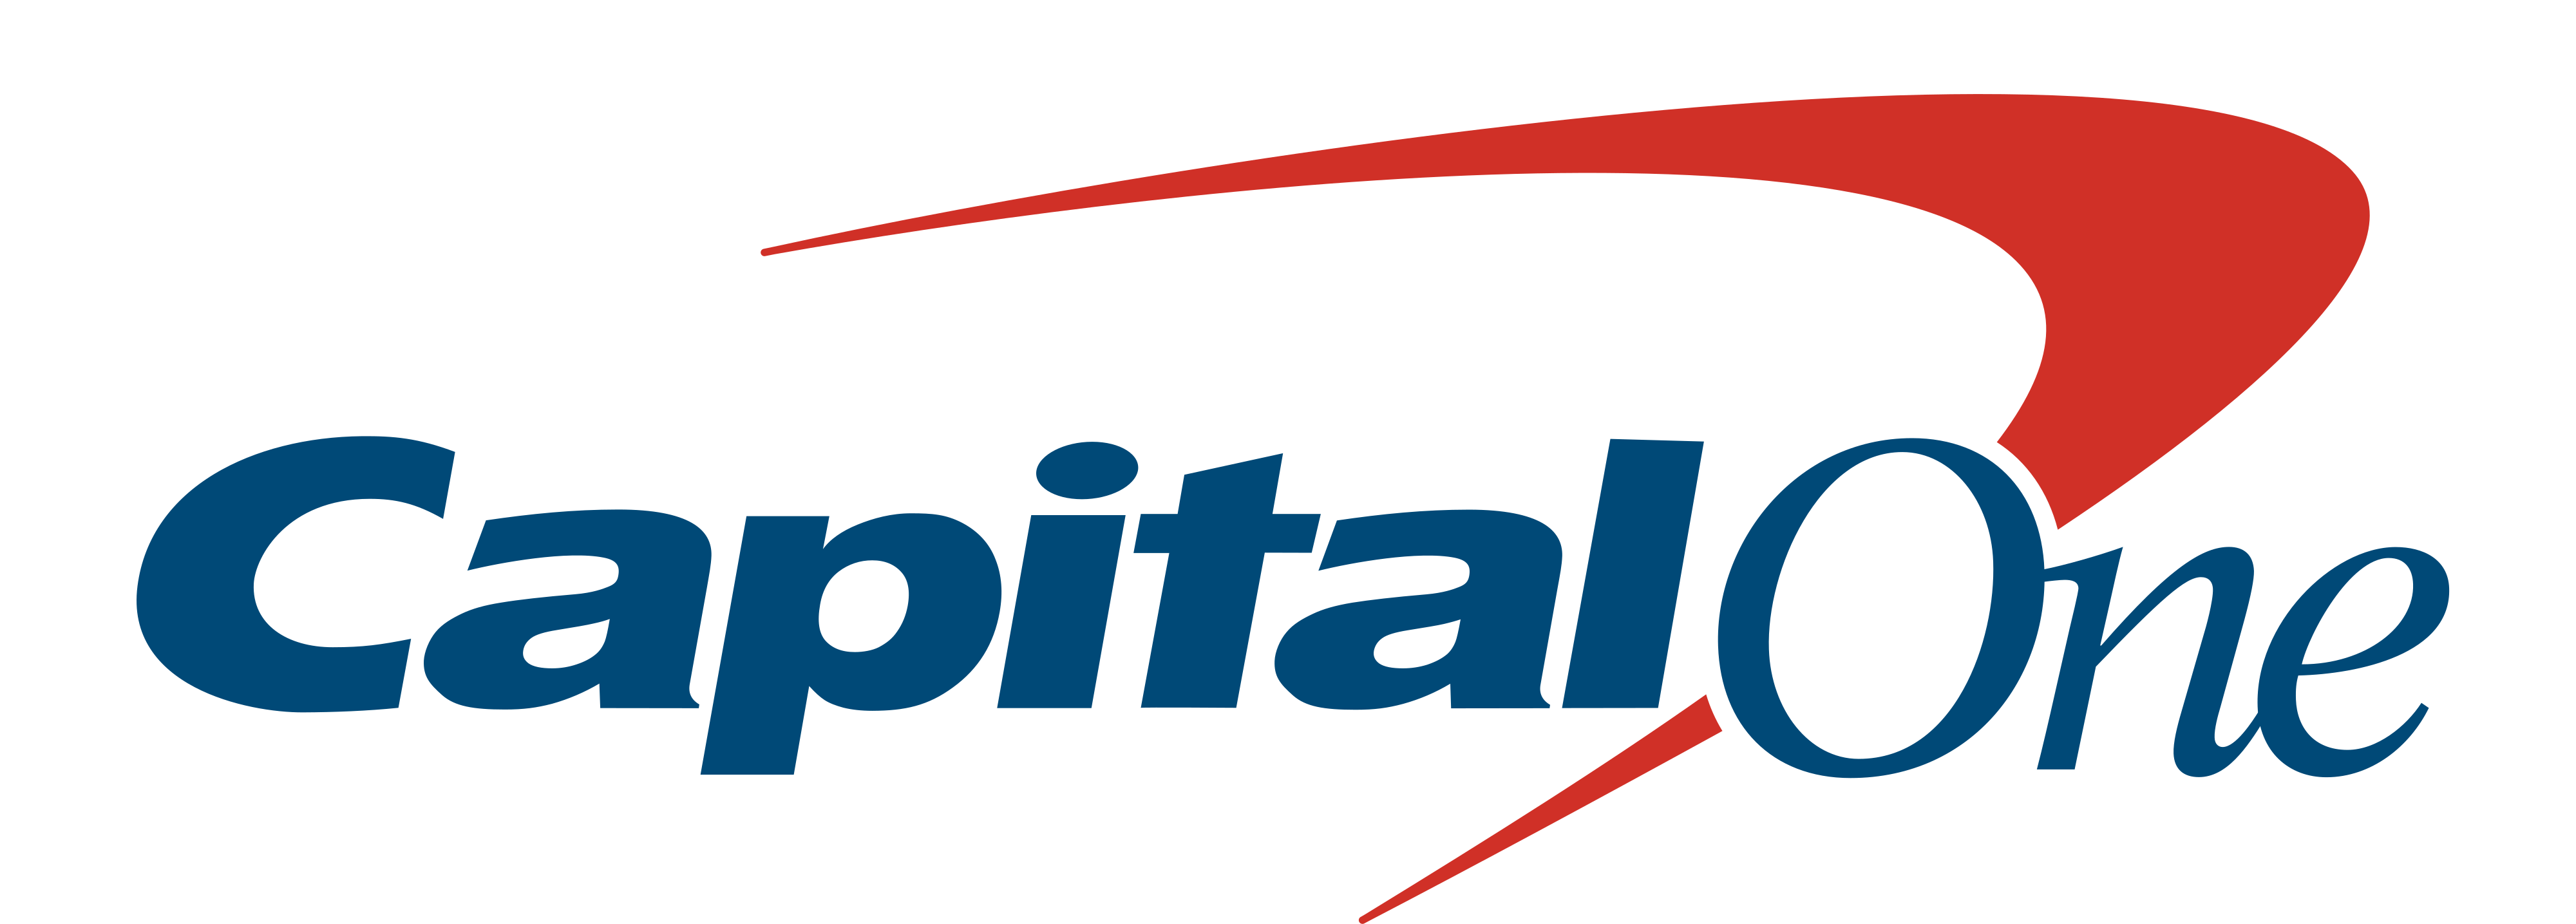 Capital One logo download.